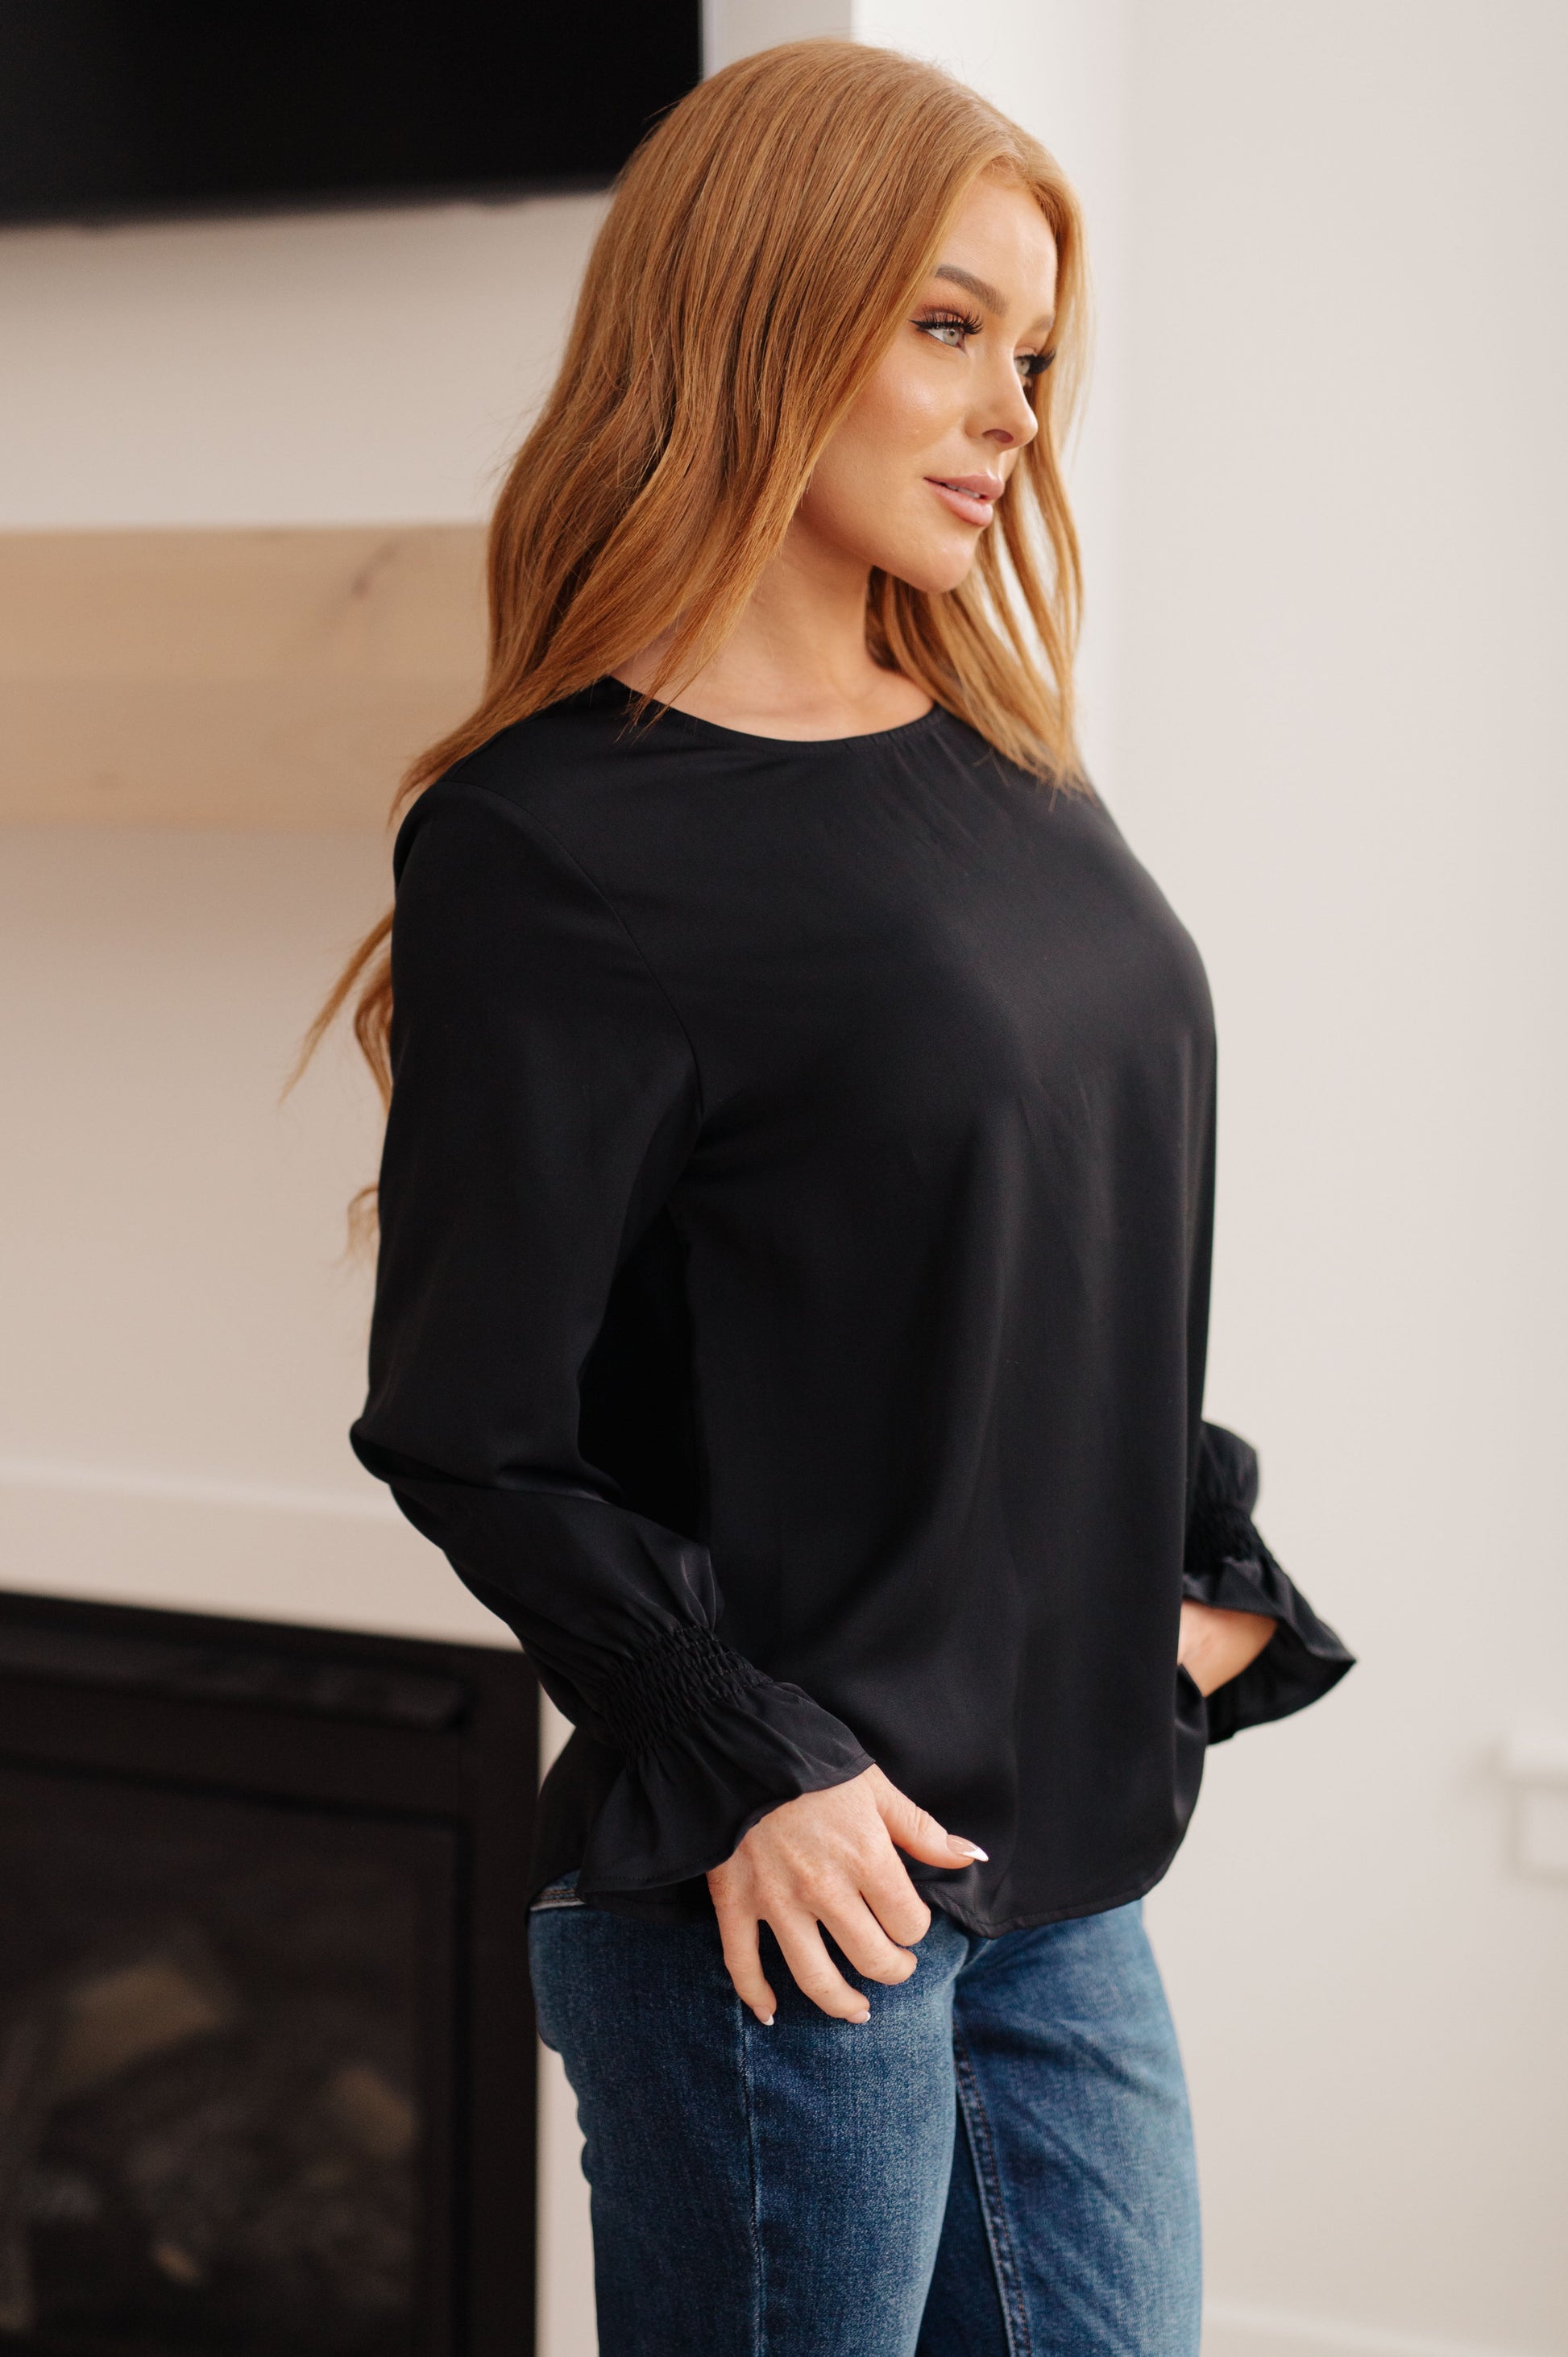 Look and feel your best, no matter the occasion, with our Peaceful Moments Smocked Sleeve Blouse. This go-to blouse has a smocked elastic sleeve cuff for a cool ruffled accent, easily transitioning from office to date night. A wardrobe staple that will take you places! S - 3X